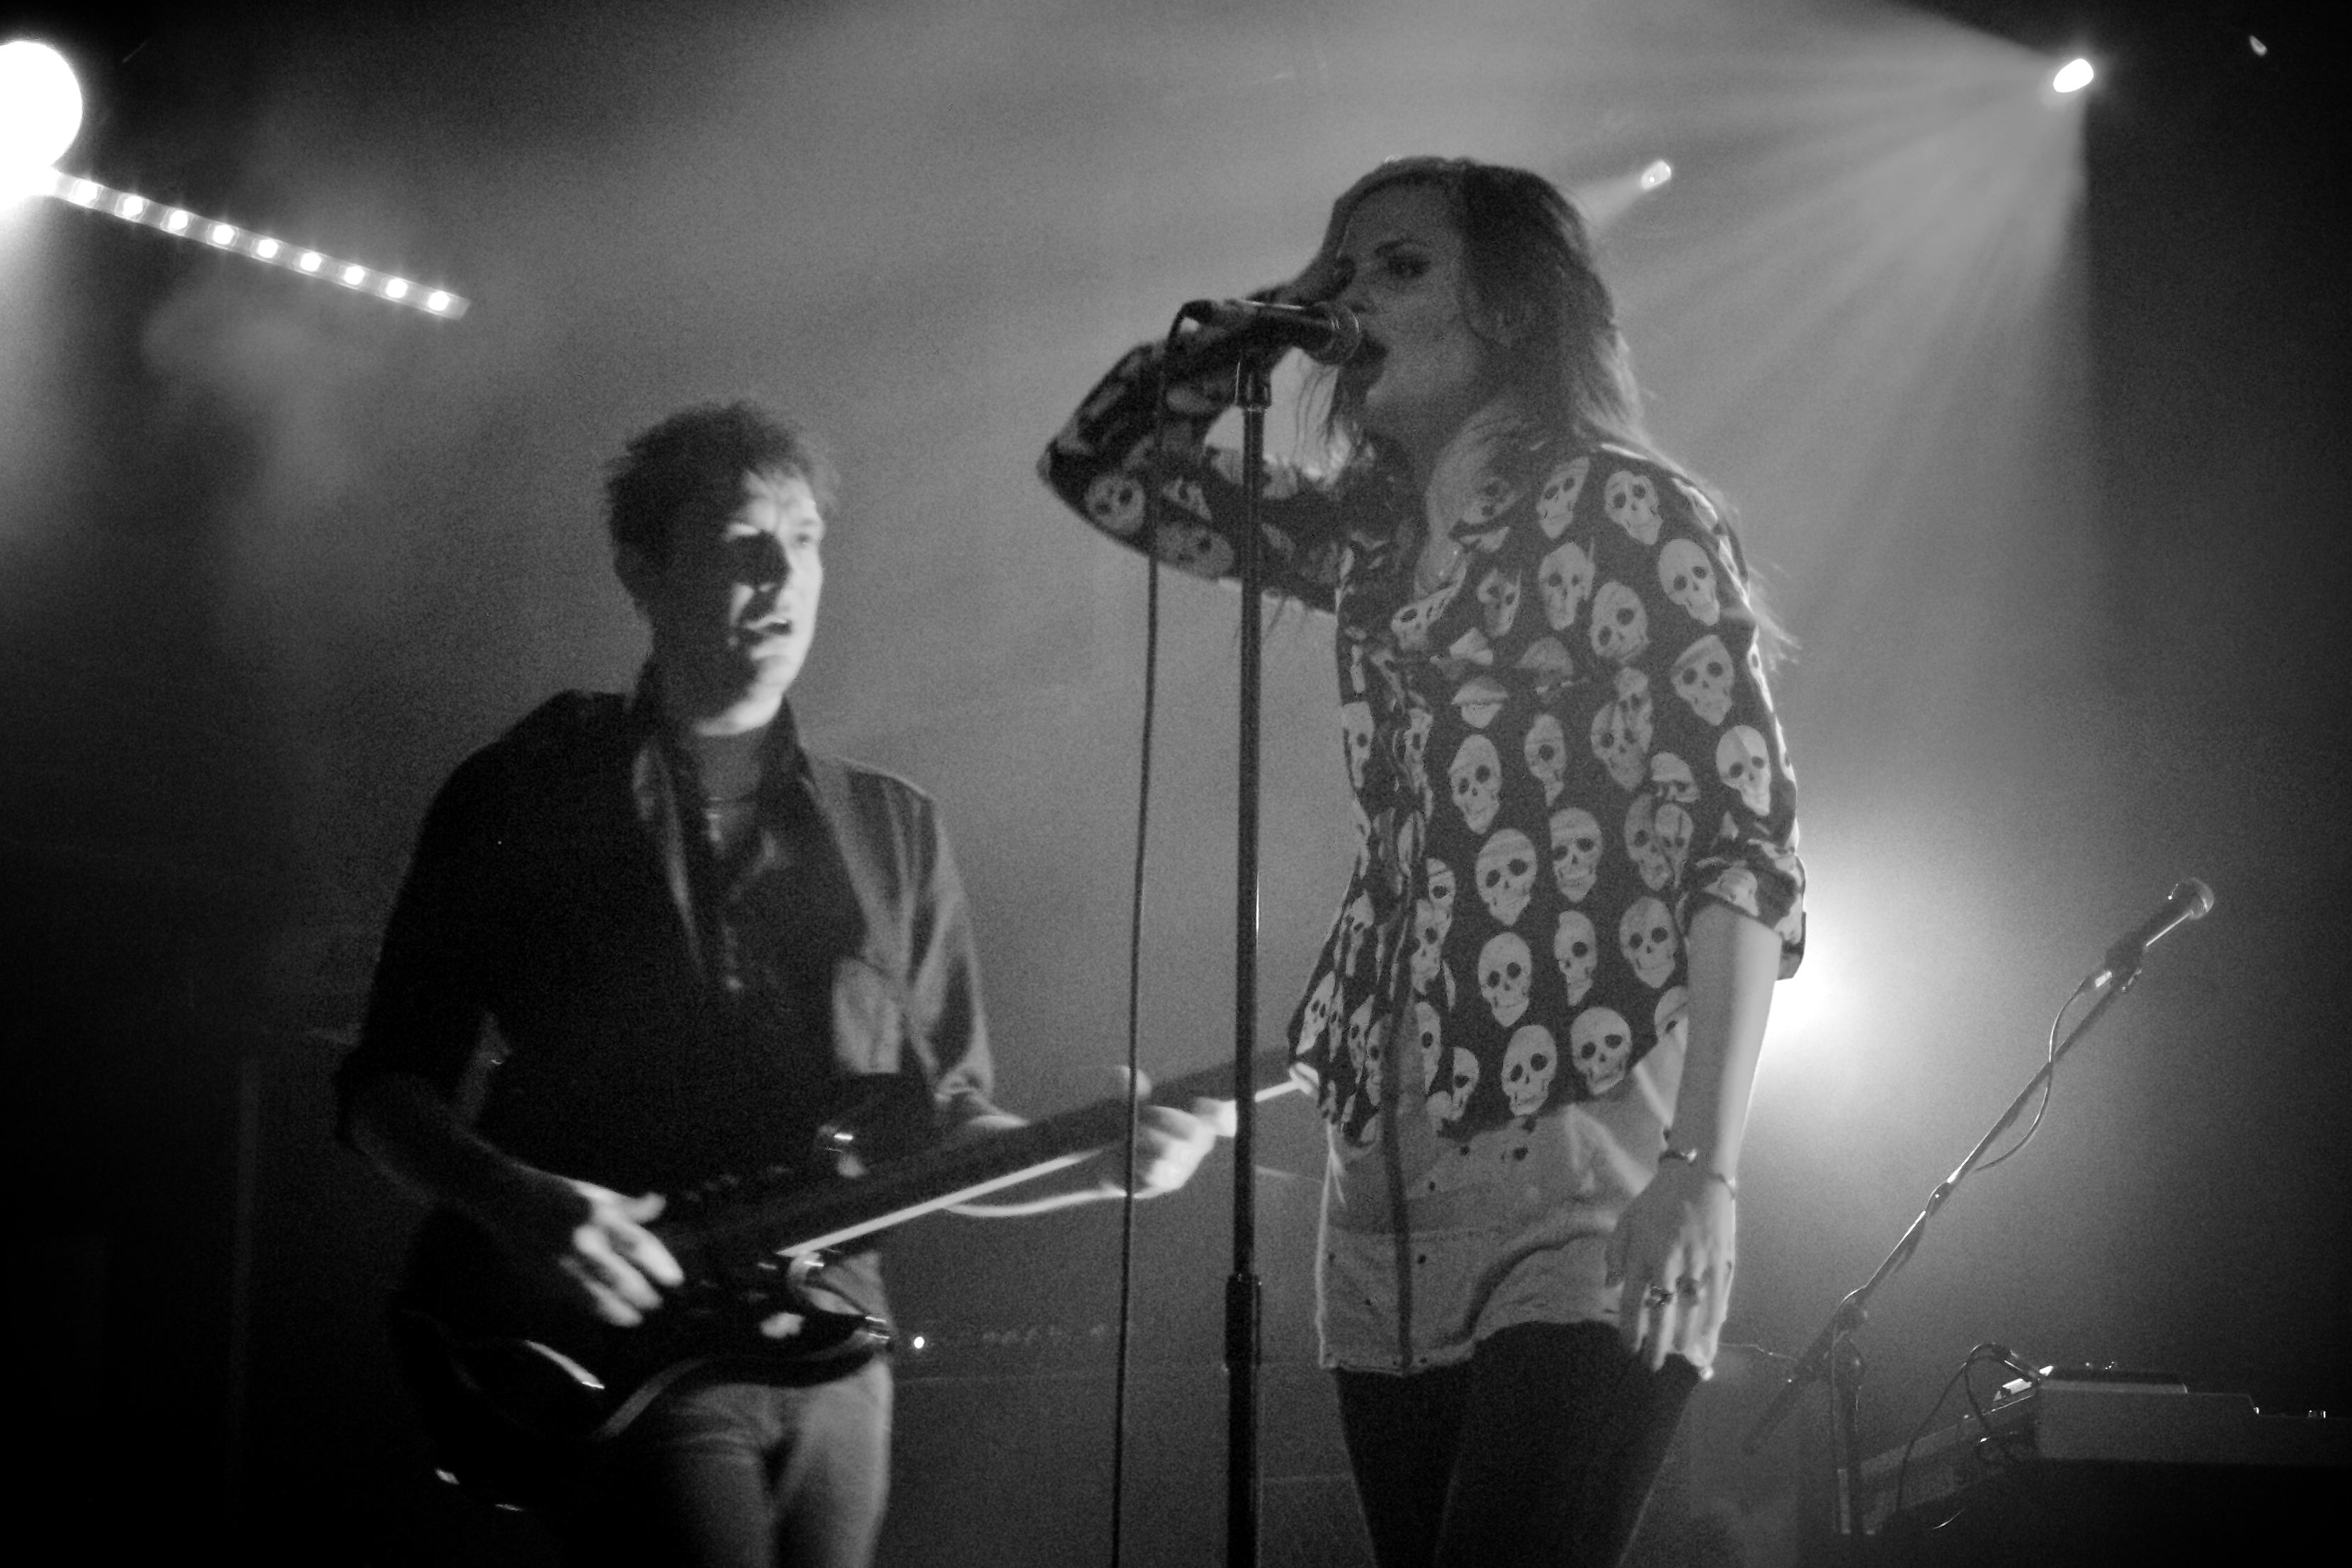 The Kills have released their performance of "Doing It To Death" from The Tonight Show.